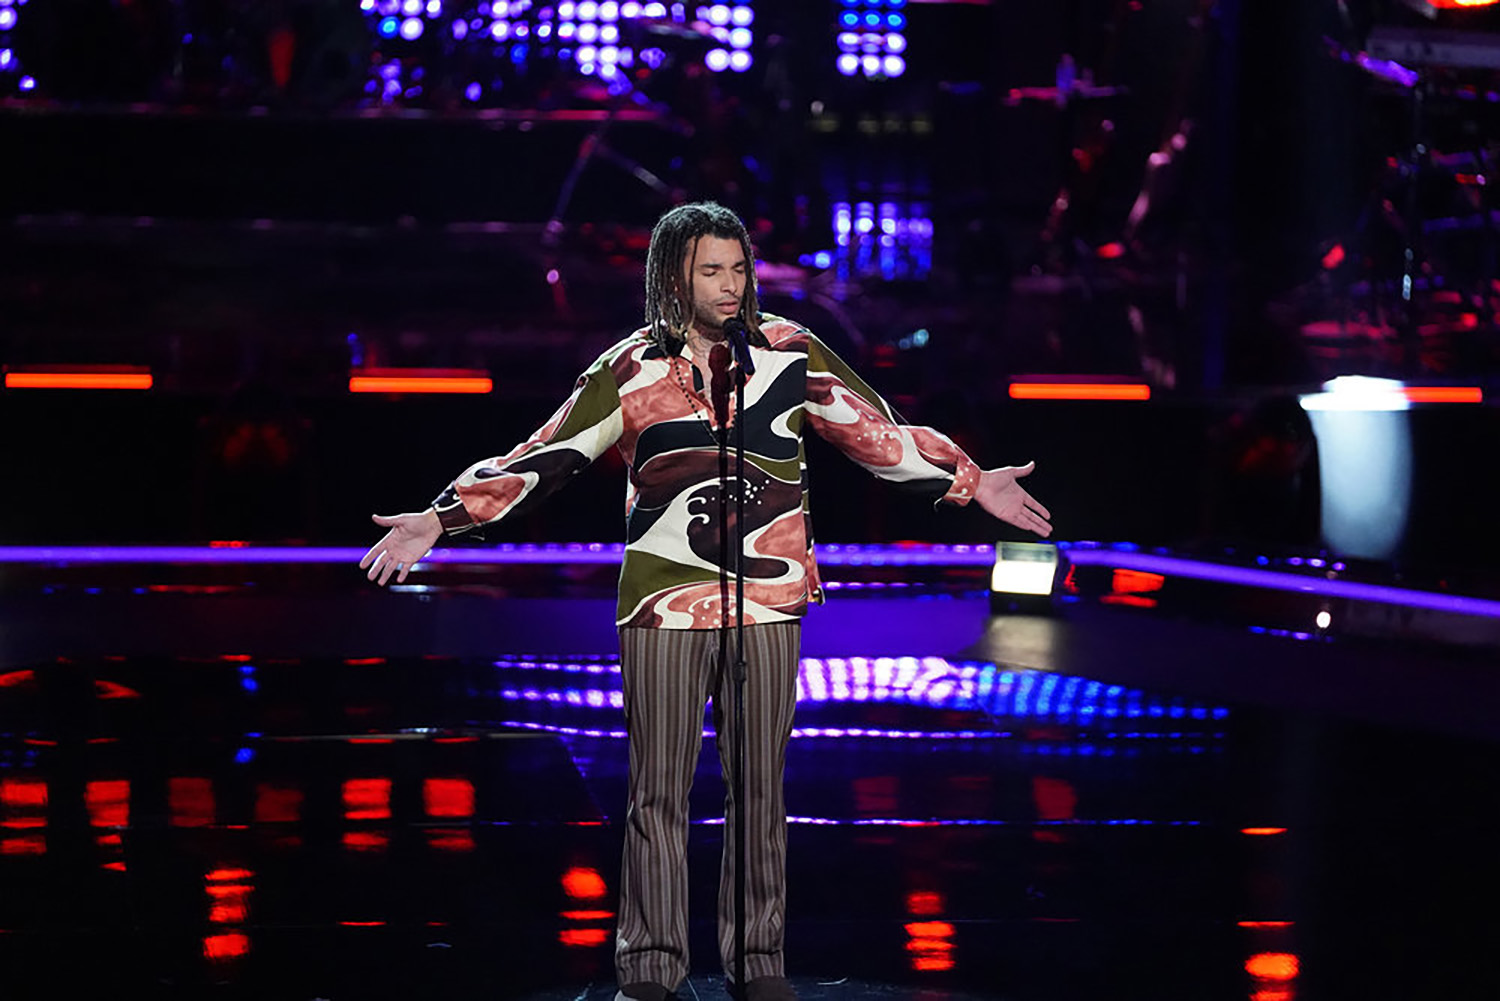 Samuel Harness performs on The Voice Season 21 Episode 12.